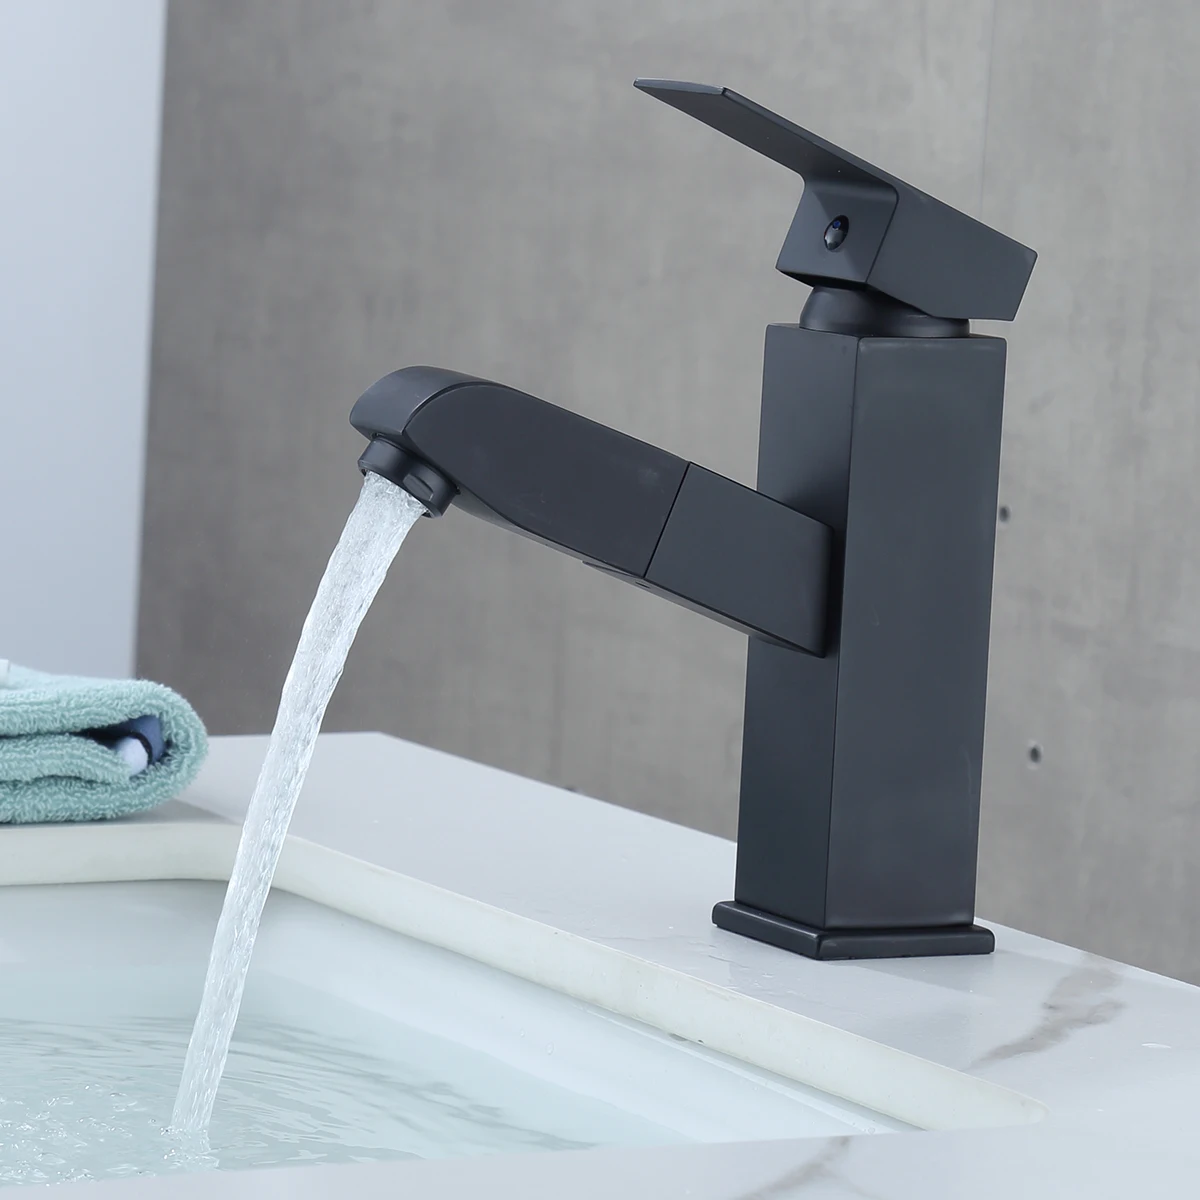 

New Pull Out Bathroom Basin Sink Faucet Hot Cold Water Mixer Tap Black Faucets Crane with Spray Tall Bathroom Faucet